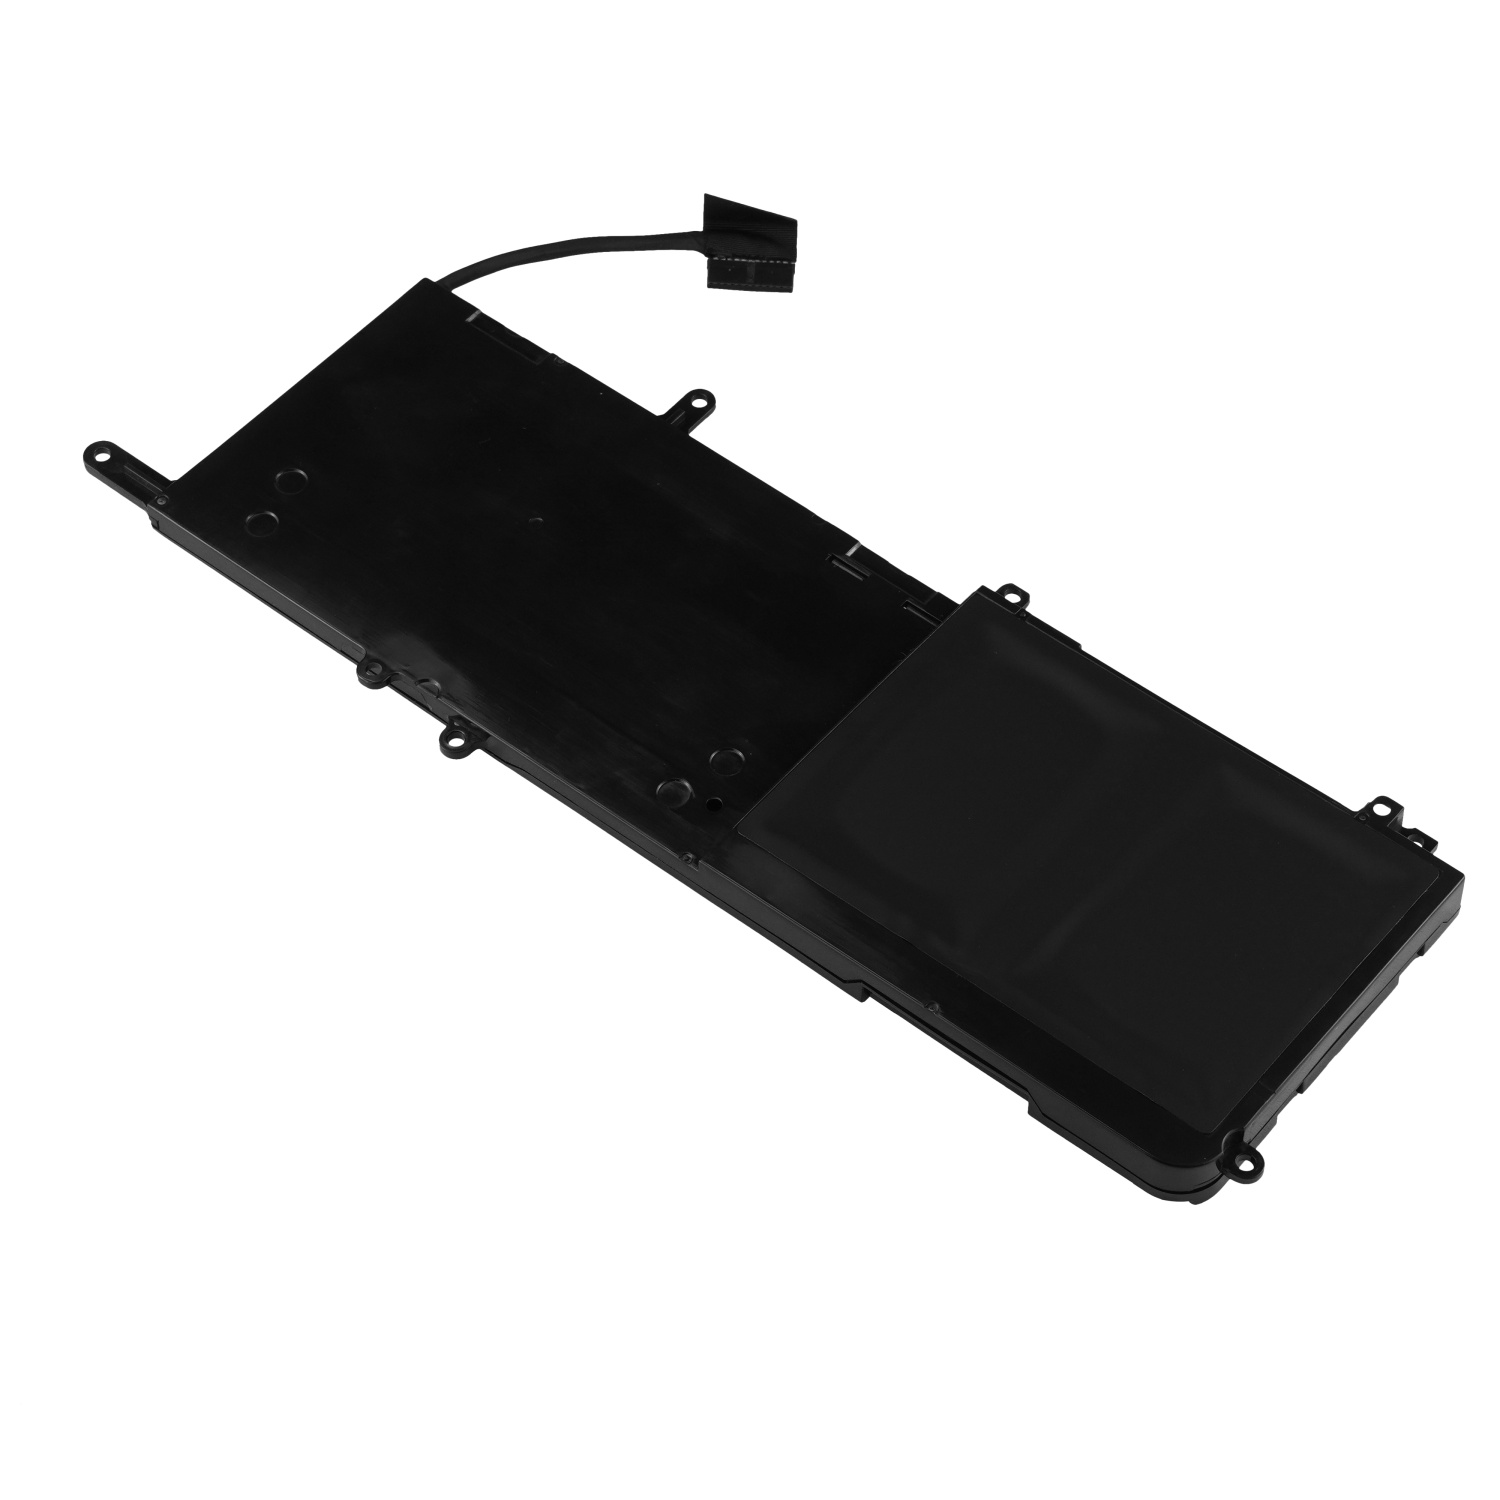 9NJM1 Laptop Battery notebook battery for Dell Alienware 15 R3 R4 17 R4 R5 P31E001 ALW17C-D1738 Notebook 0546FF 0HF250 44T2R HF250 MG2YH